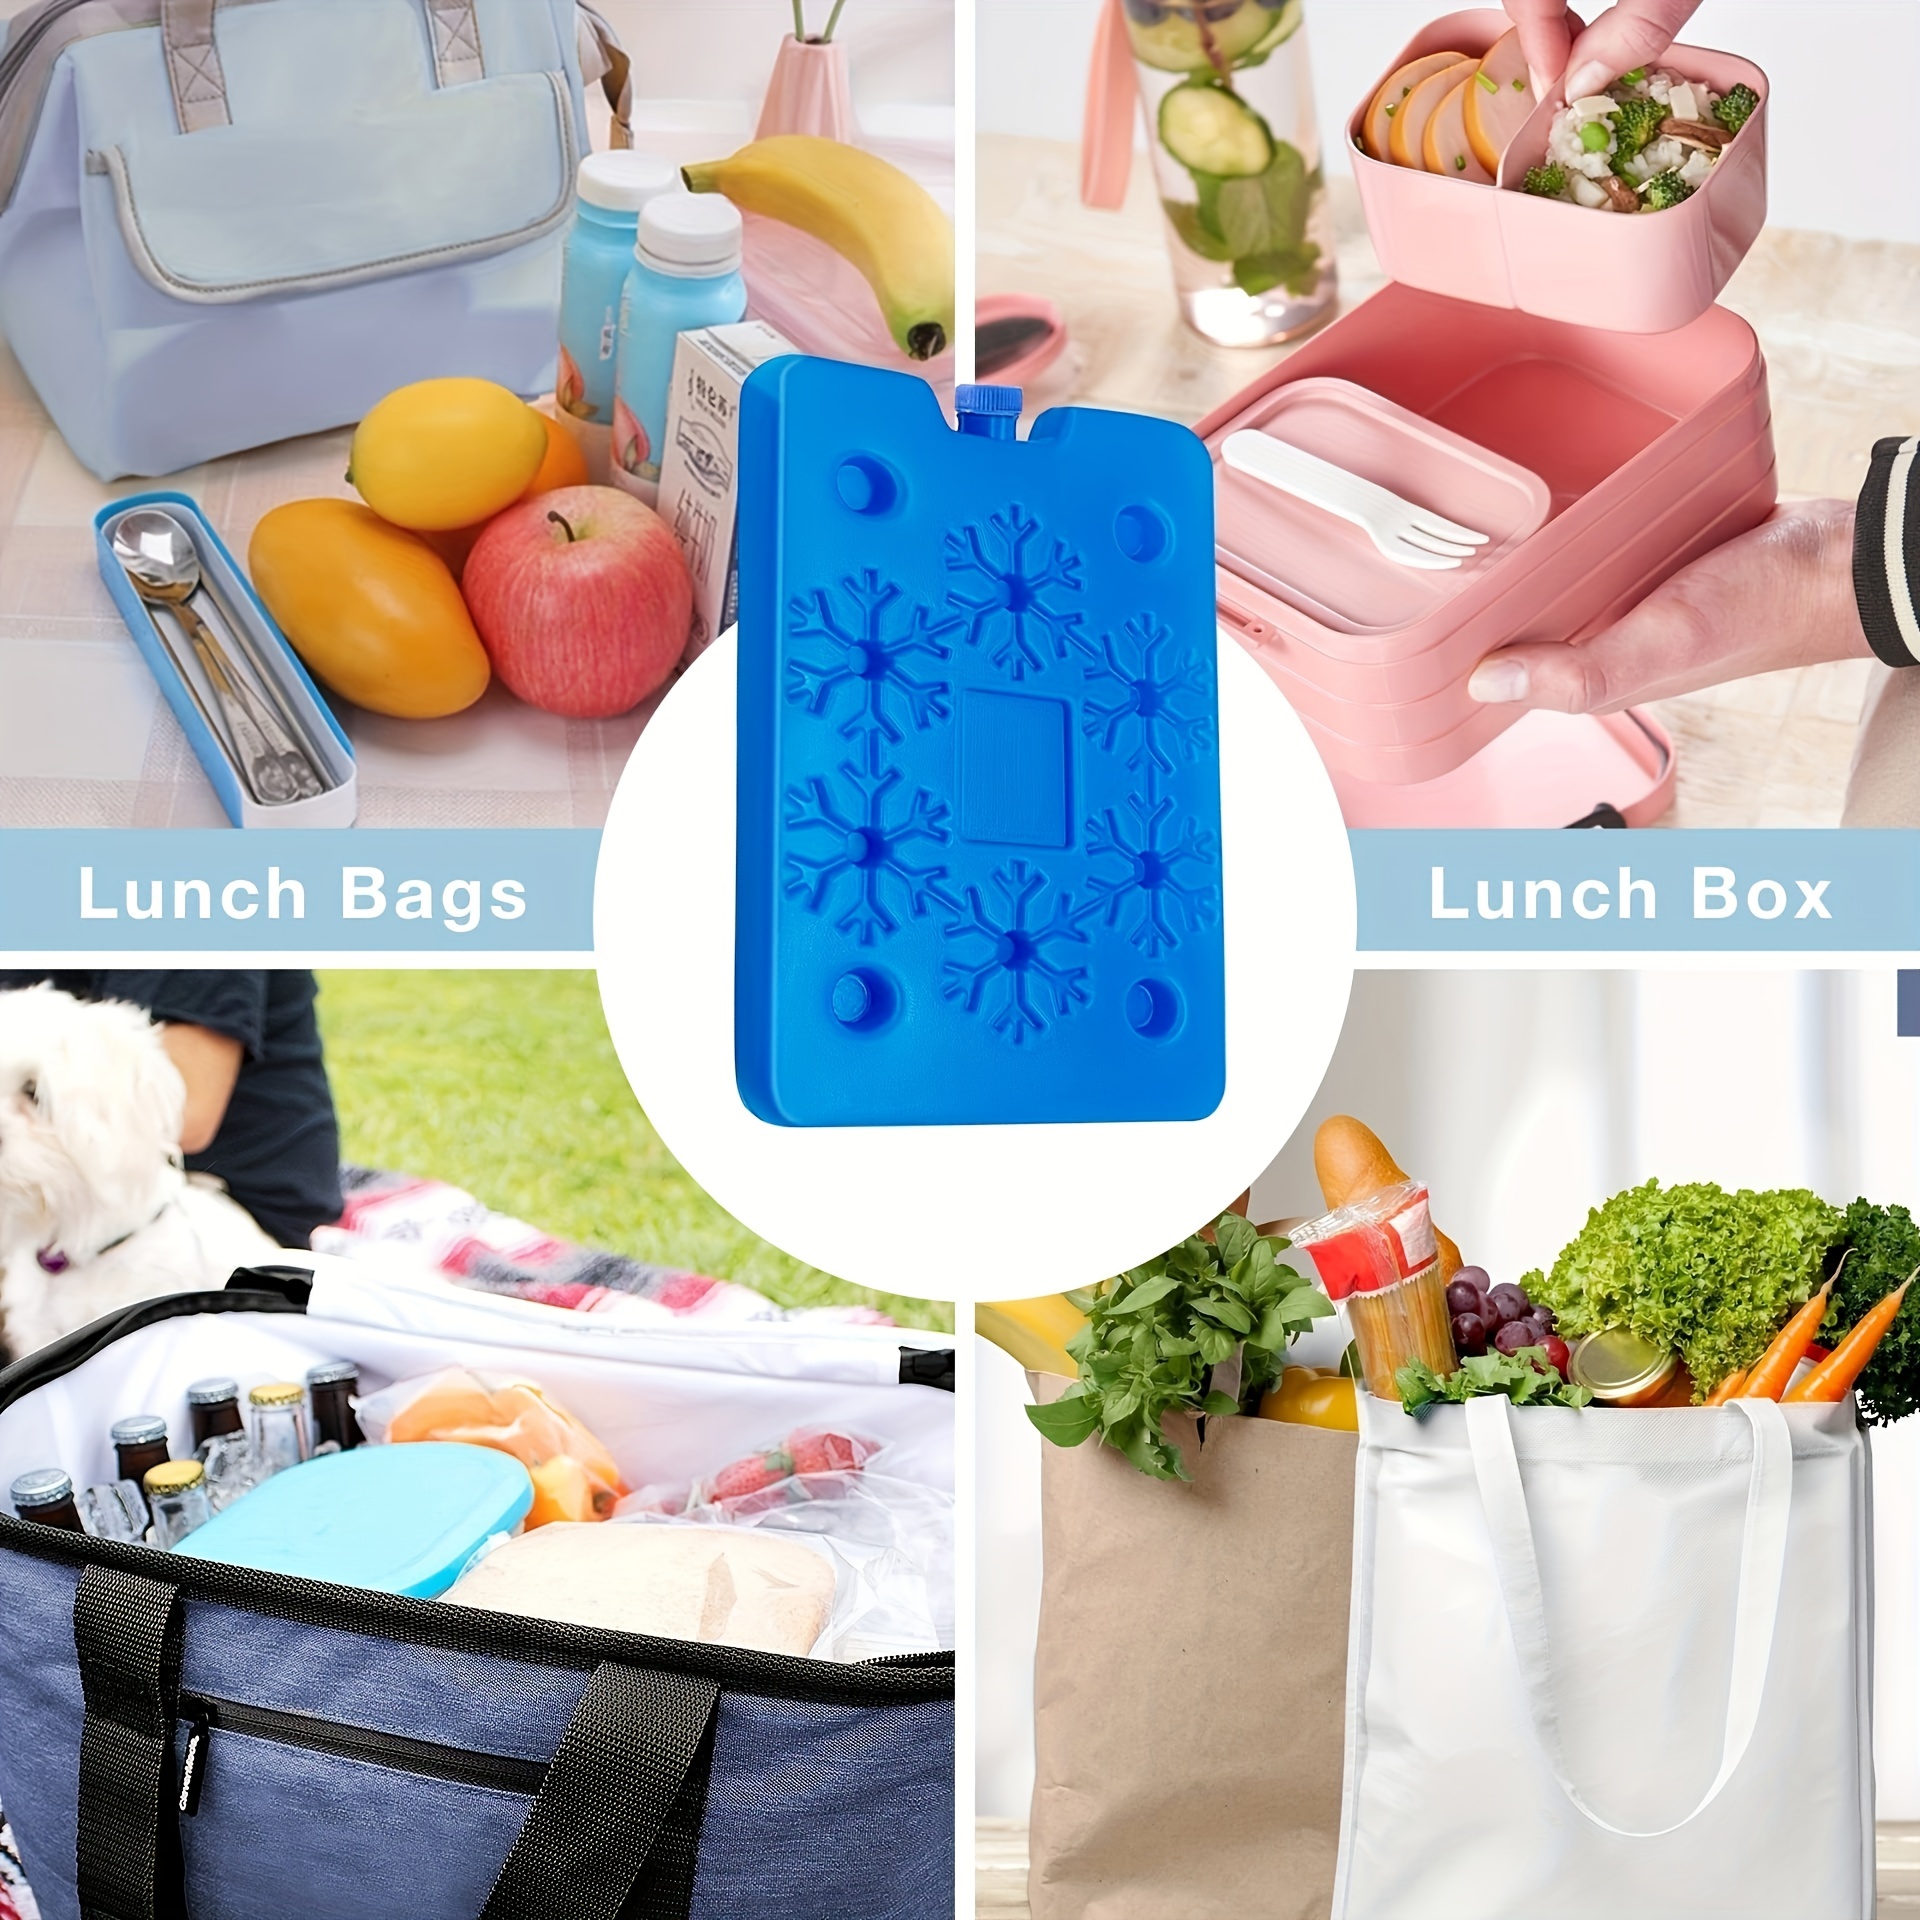 Portable Ice Packs Slim Long-Lasting for Lunch Box Camping Reusable Freezer  Pack